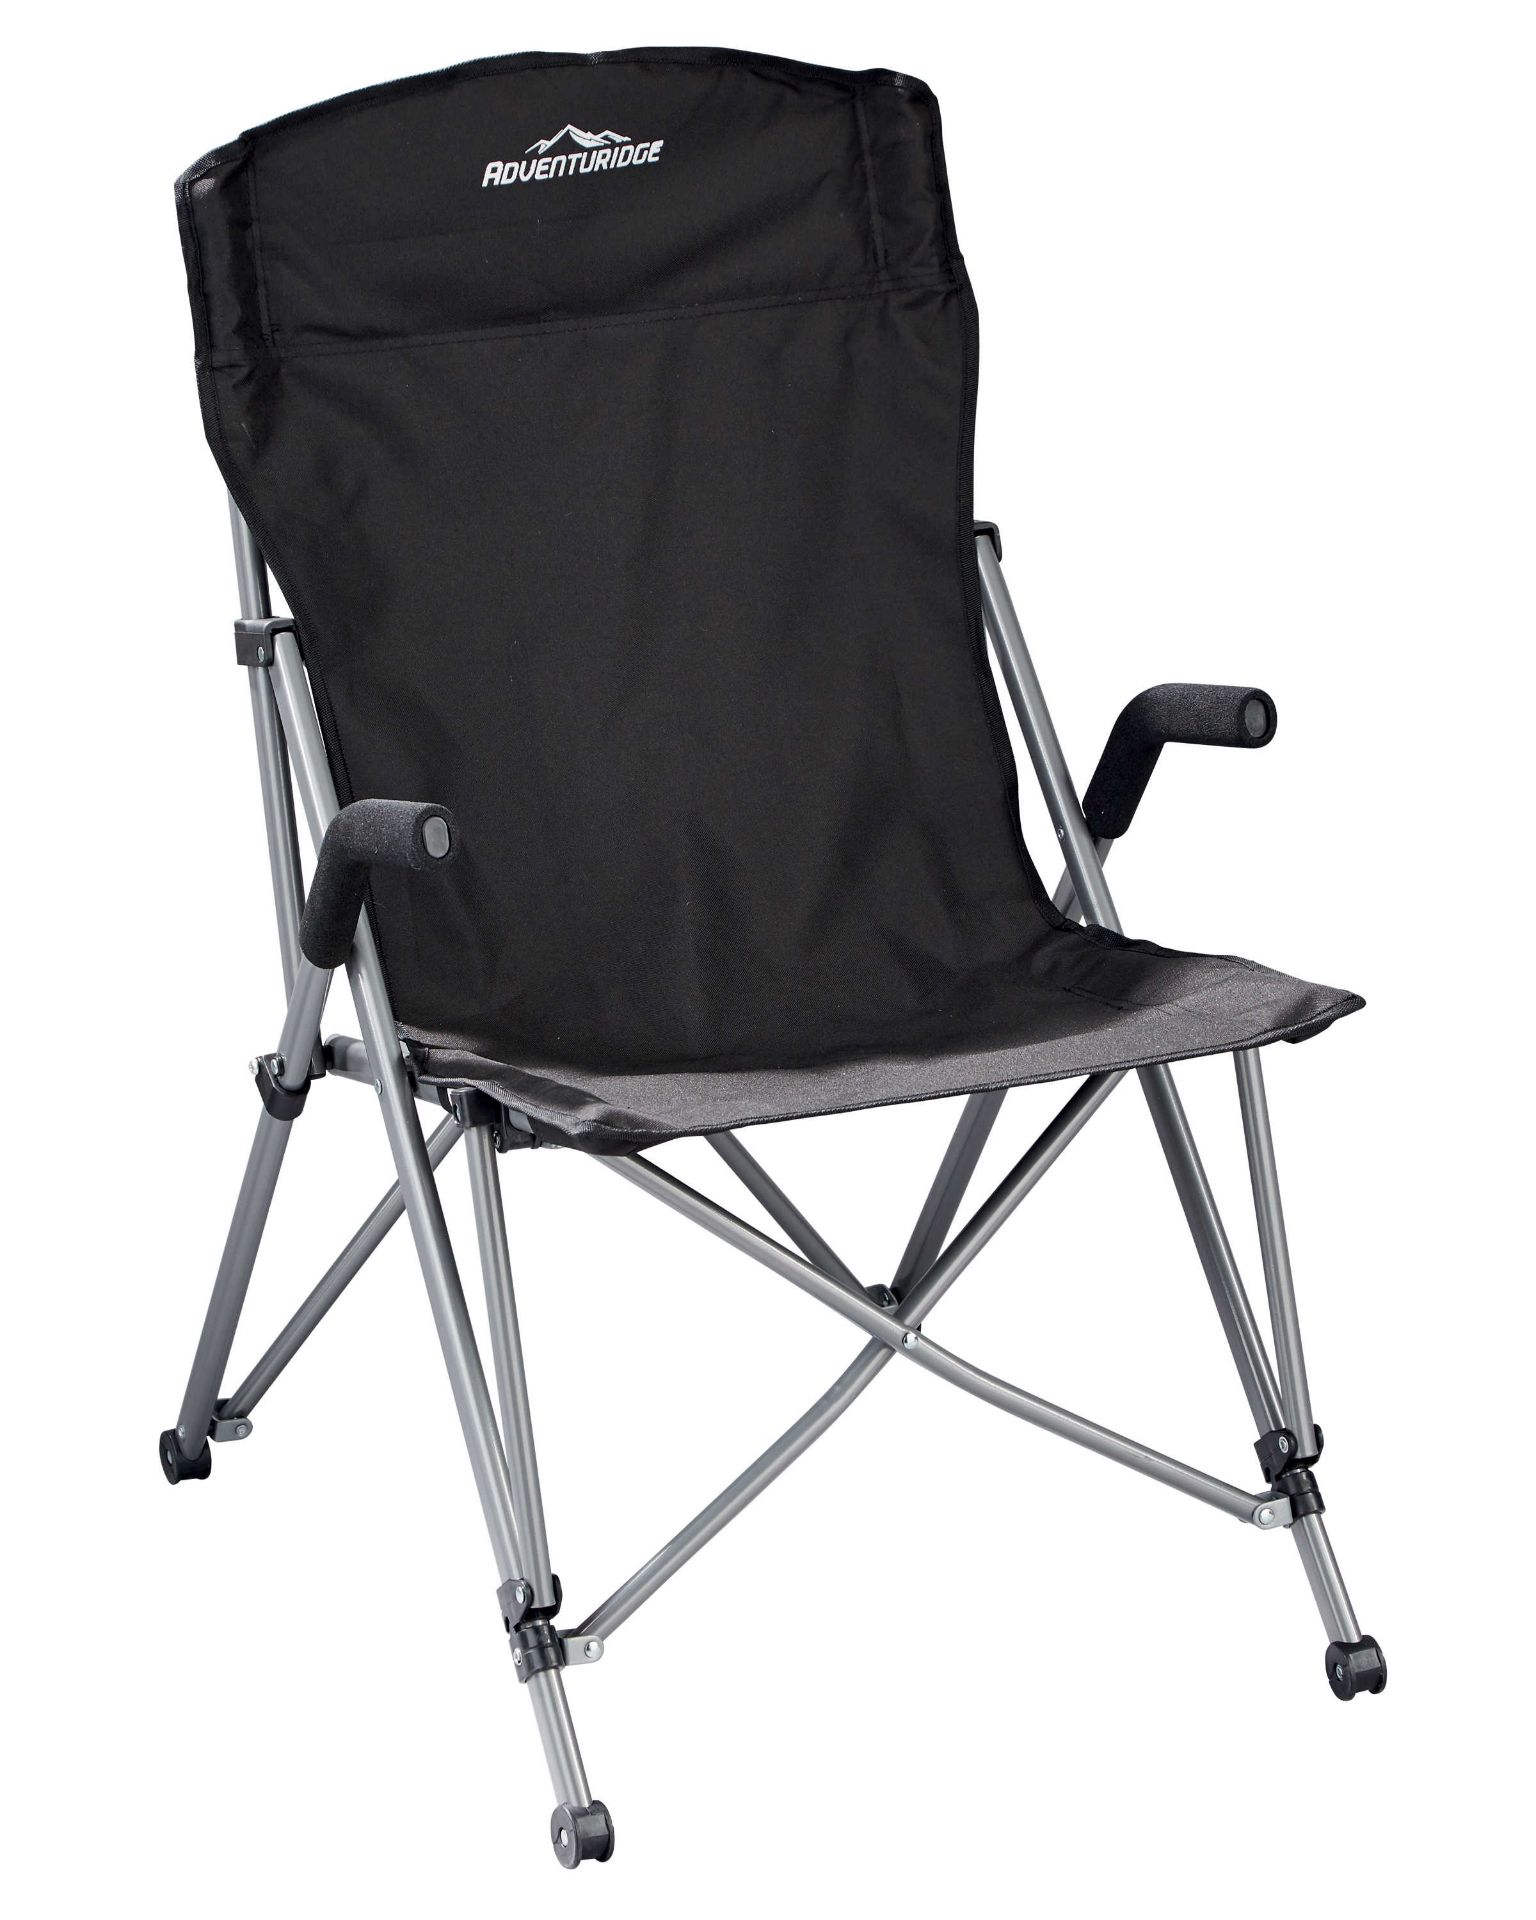 V Brand New Expedition Chair In Silver/Black With Carry Case - Lightweight Steel Frame So Ideal